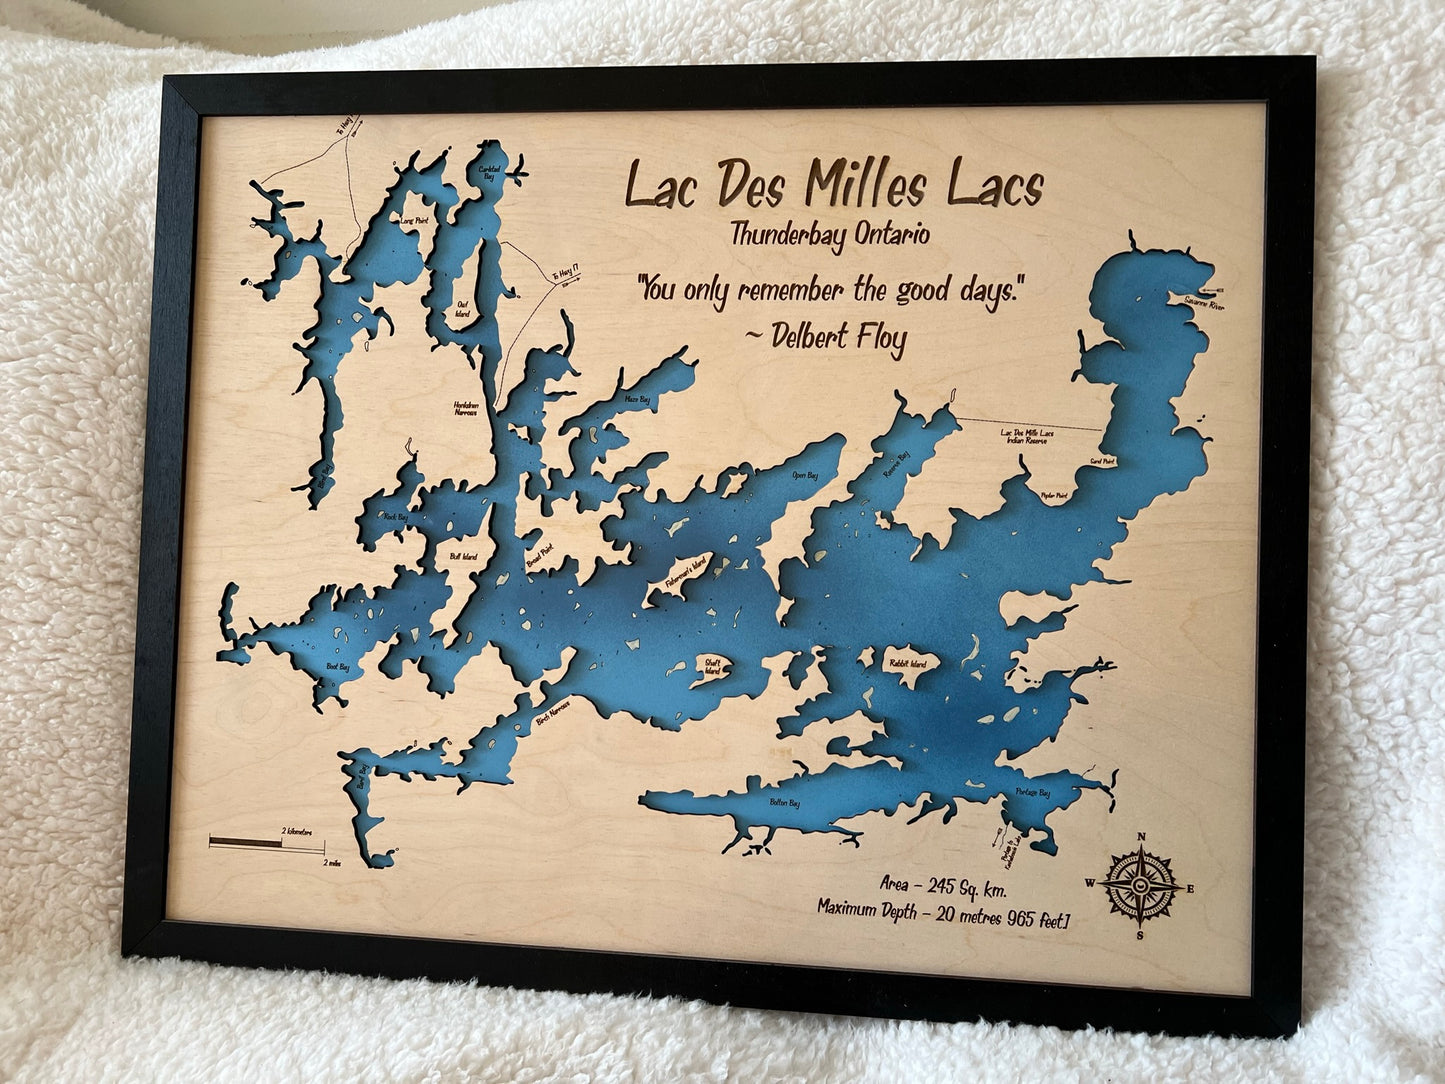 Layered Wood Engraved Map - Lac Des Mille Lacs